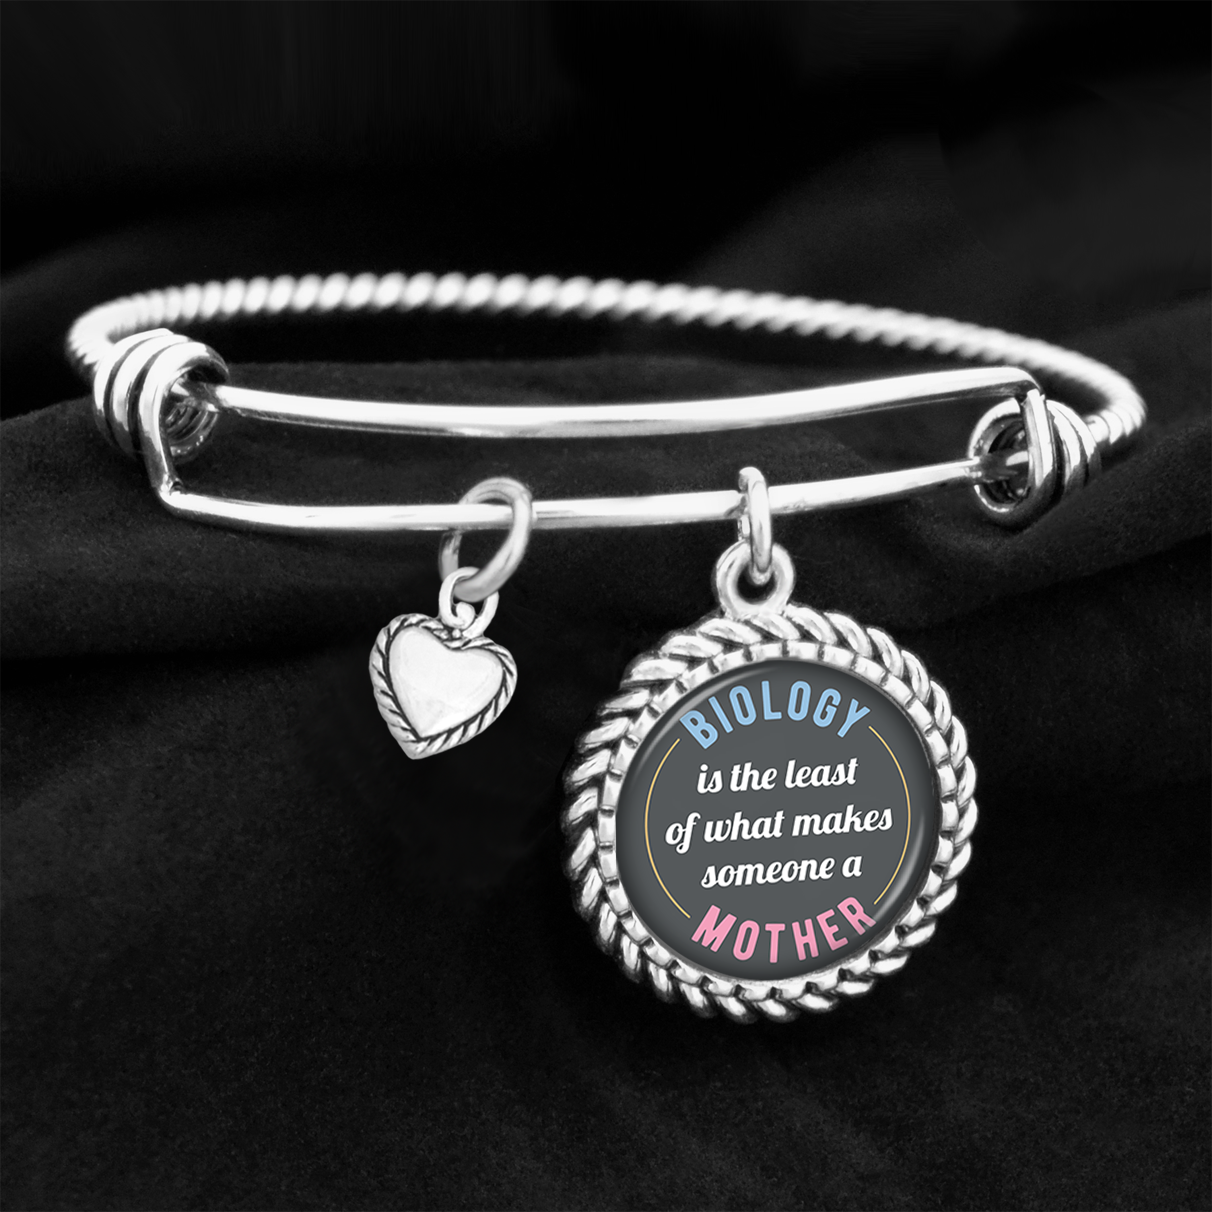 What Makes Someone A Mother Charm Bracelet